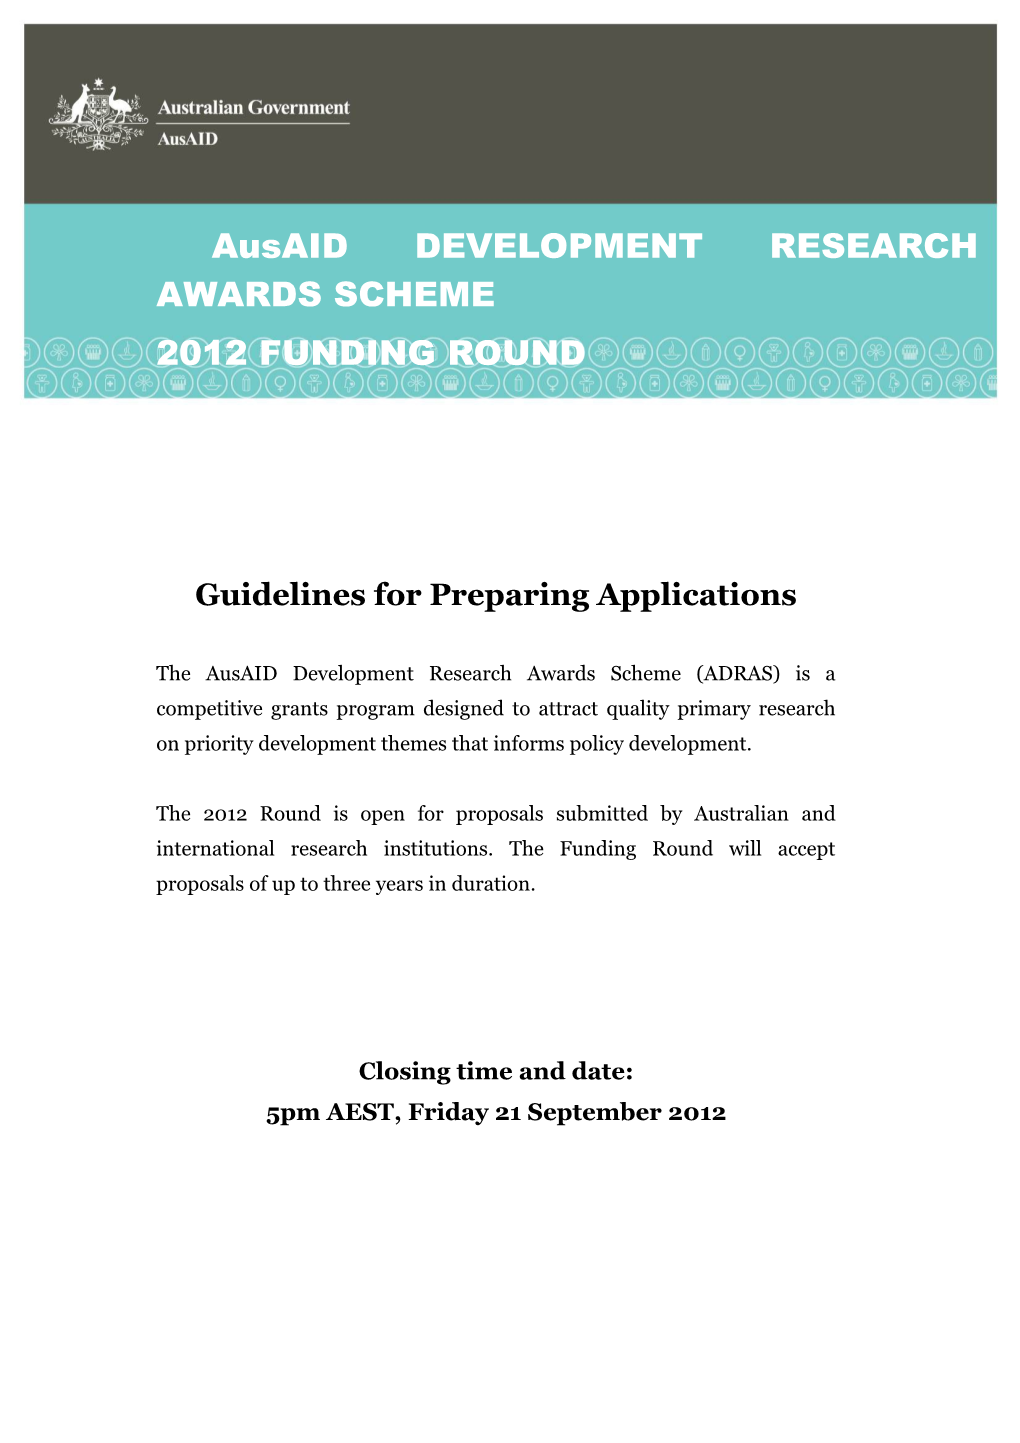 Guidelines for Preparing Applications